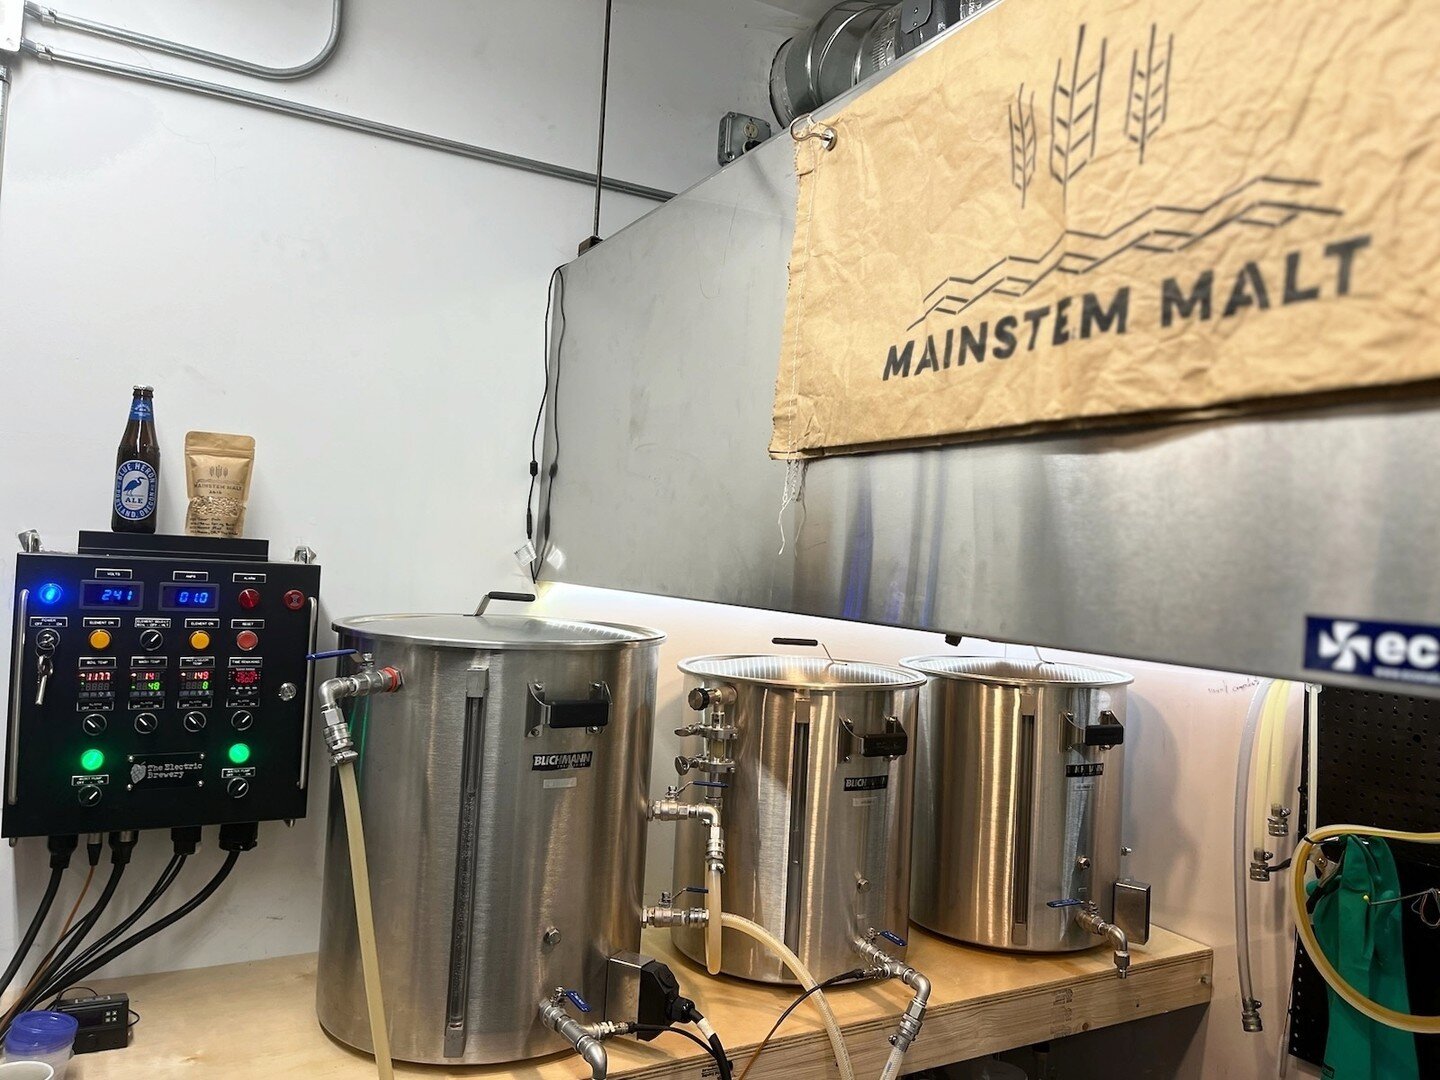 Back in 2016, Mainstem co-founder Phil/@tributary_to bought a big ol' &quot;Mainstem Malt&quot; stencil and would ink each bag of malt by hand. ⁠
⁠
The malt was being produced in 4 ton batches in collaboration with @lincmalt, using @salmonsafe barley